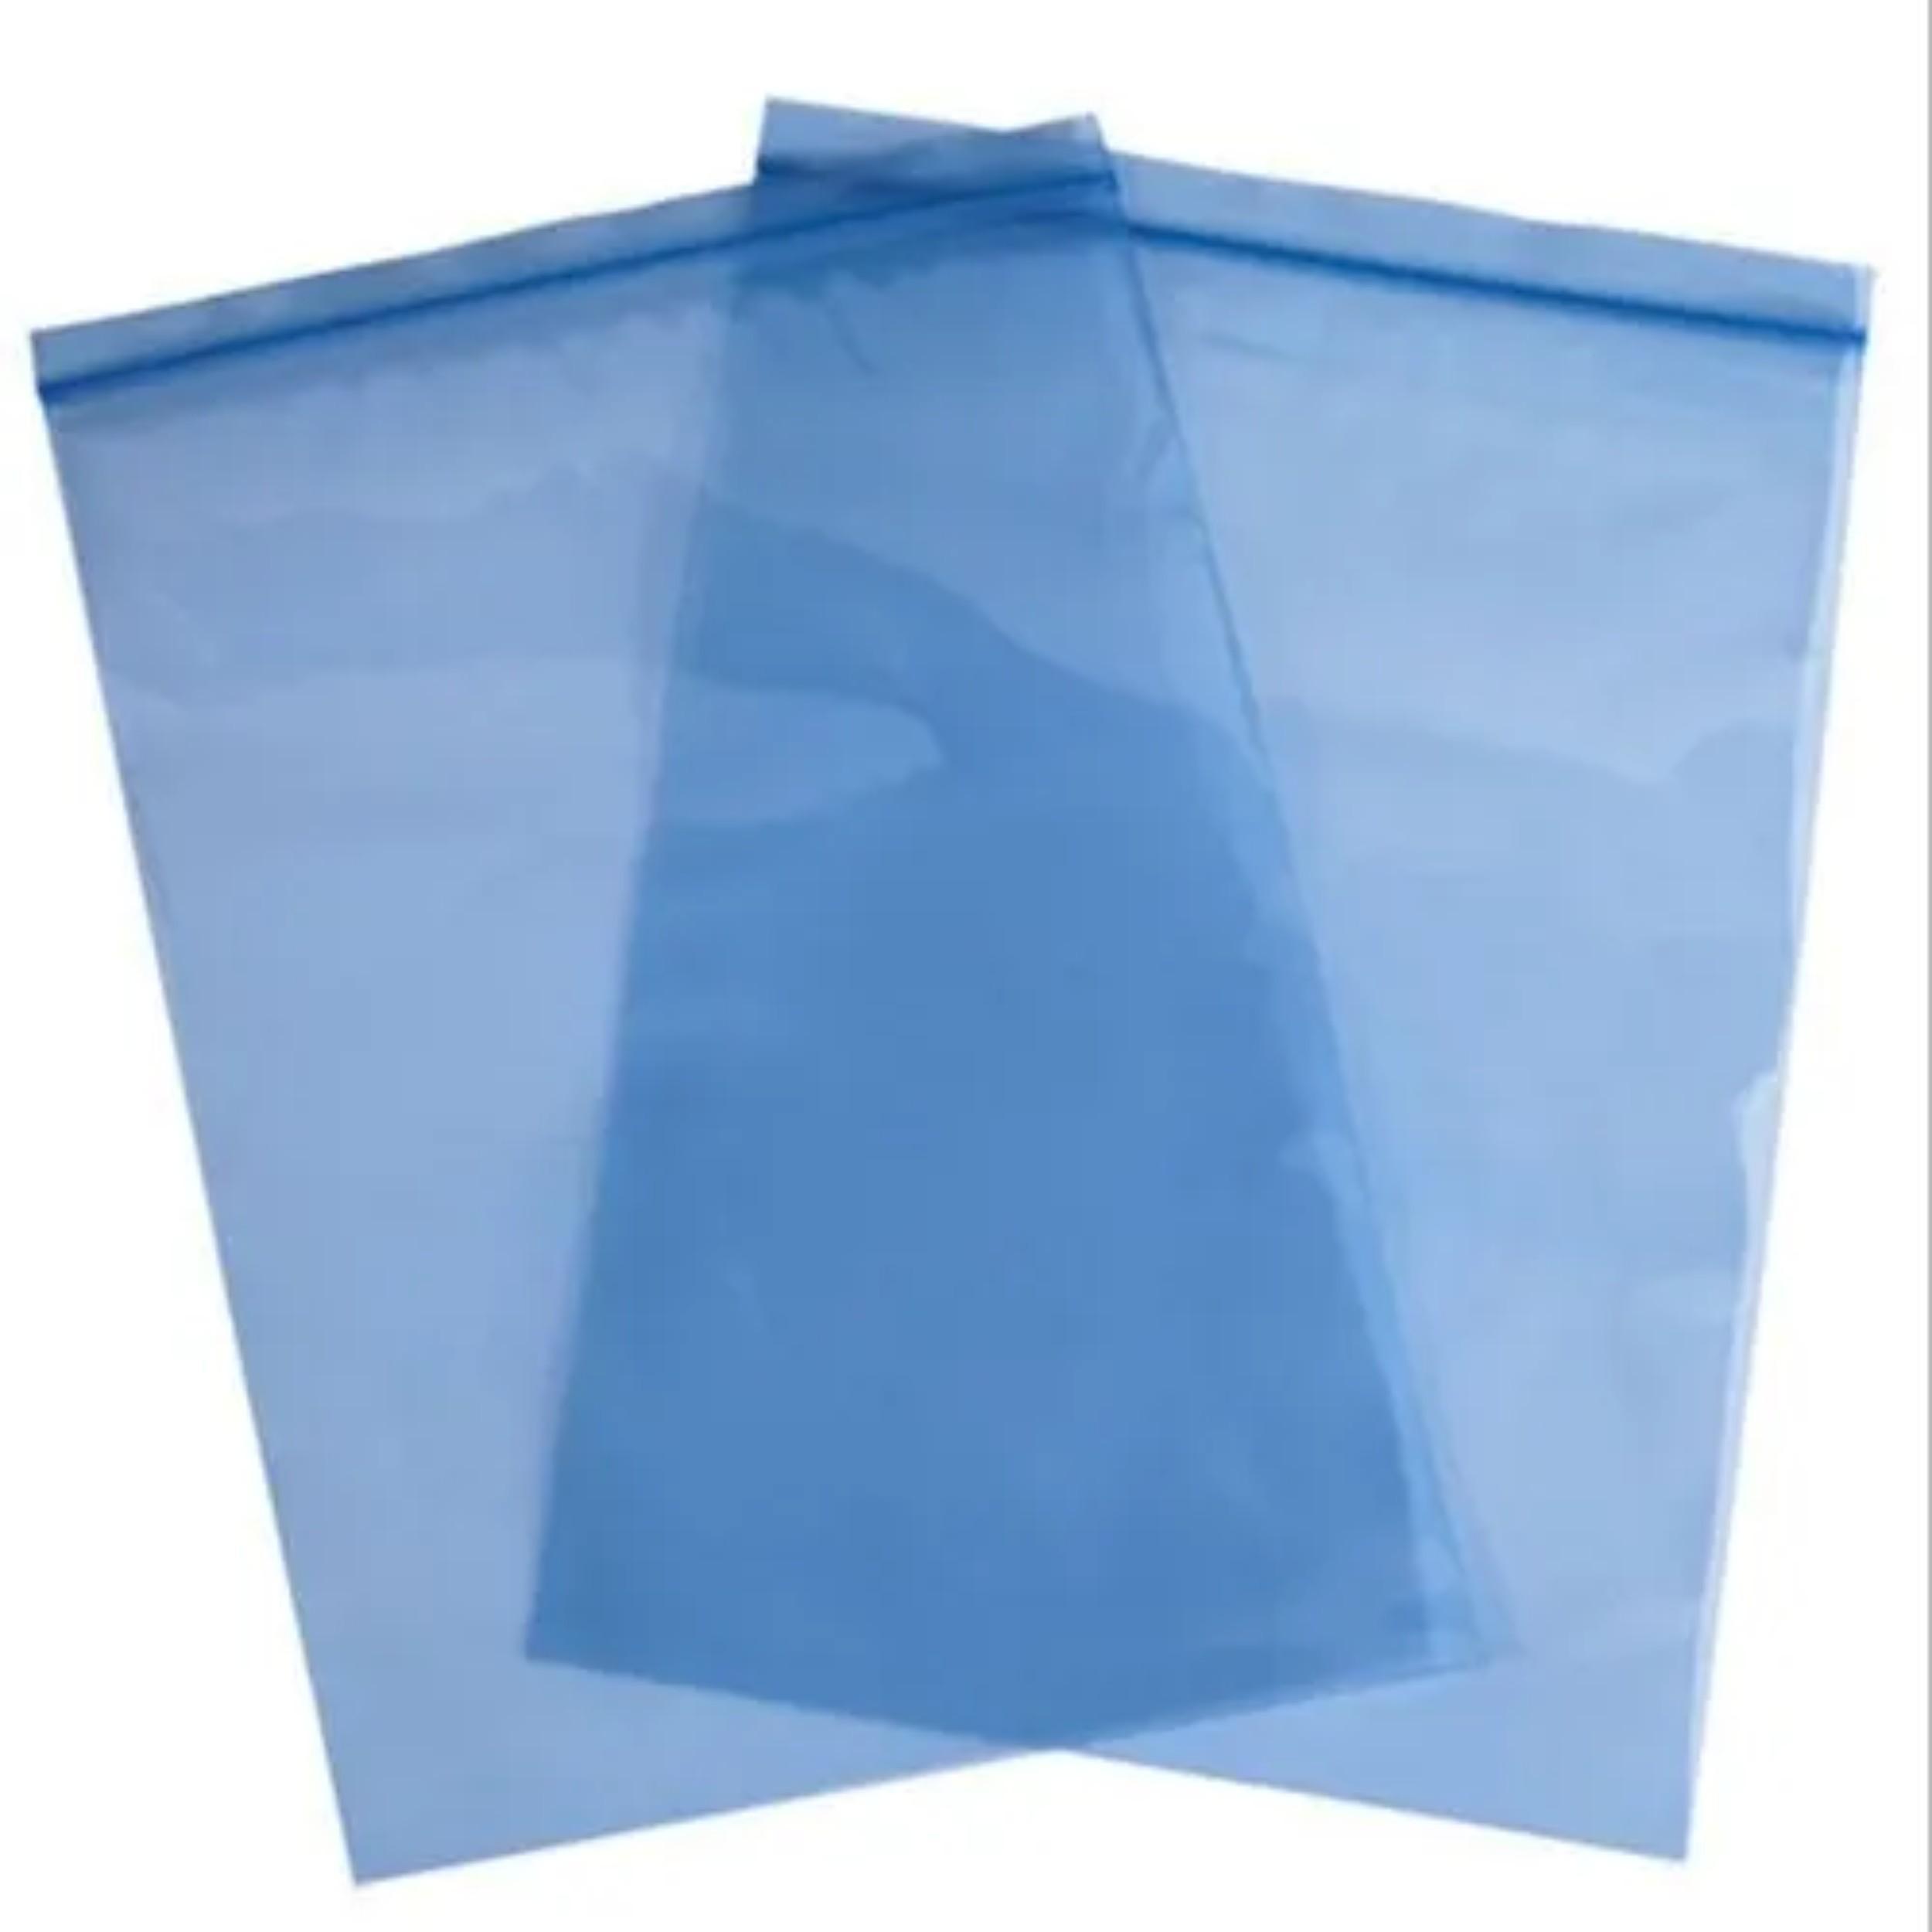 ARMOR VCI - Poly VCI Bags - PolyPro Packaging